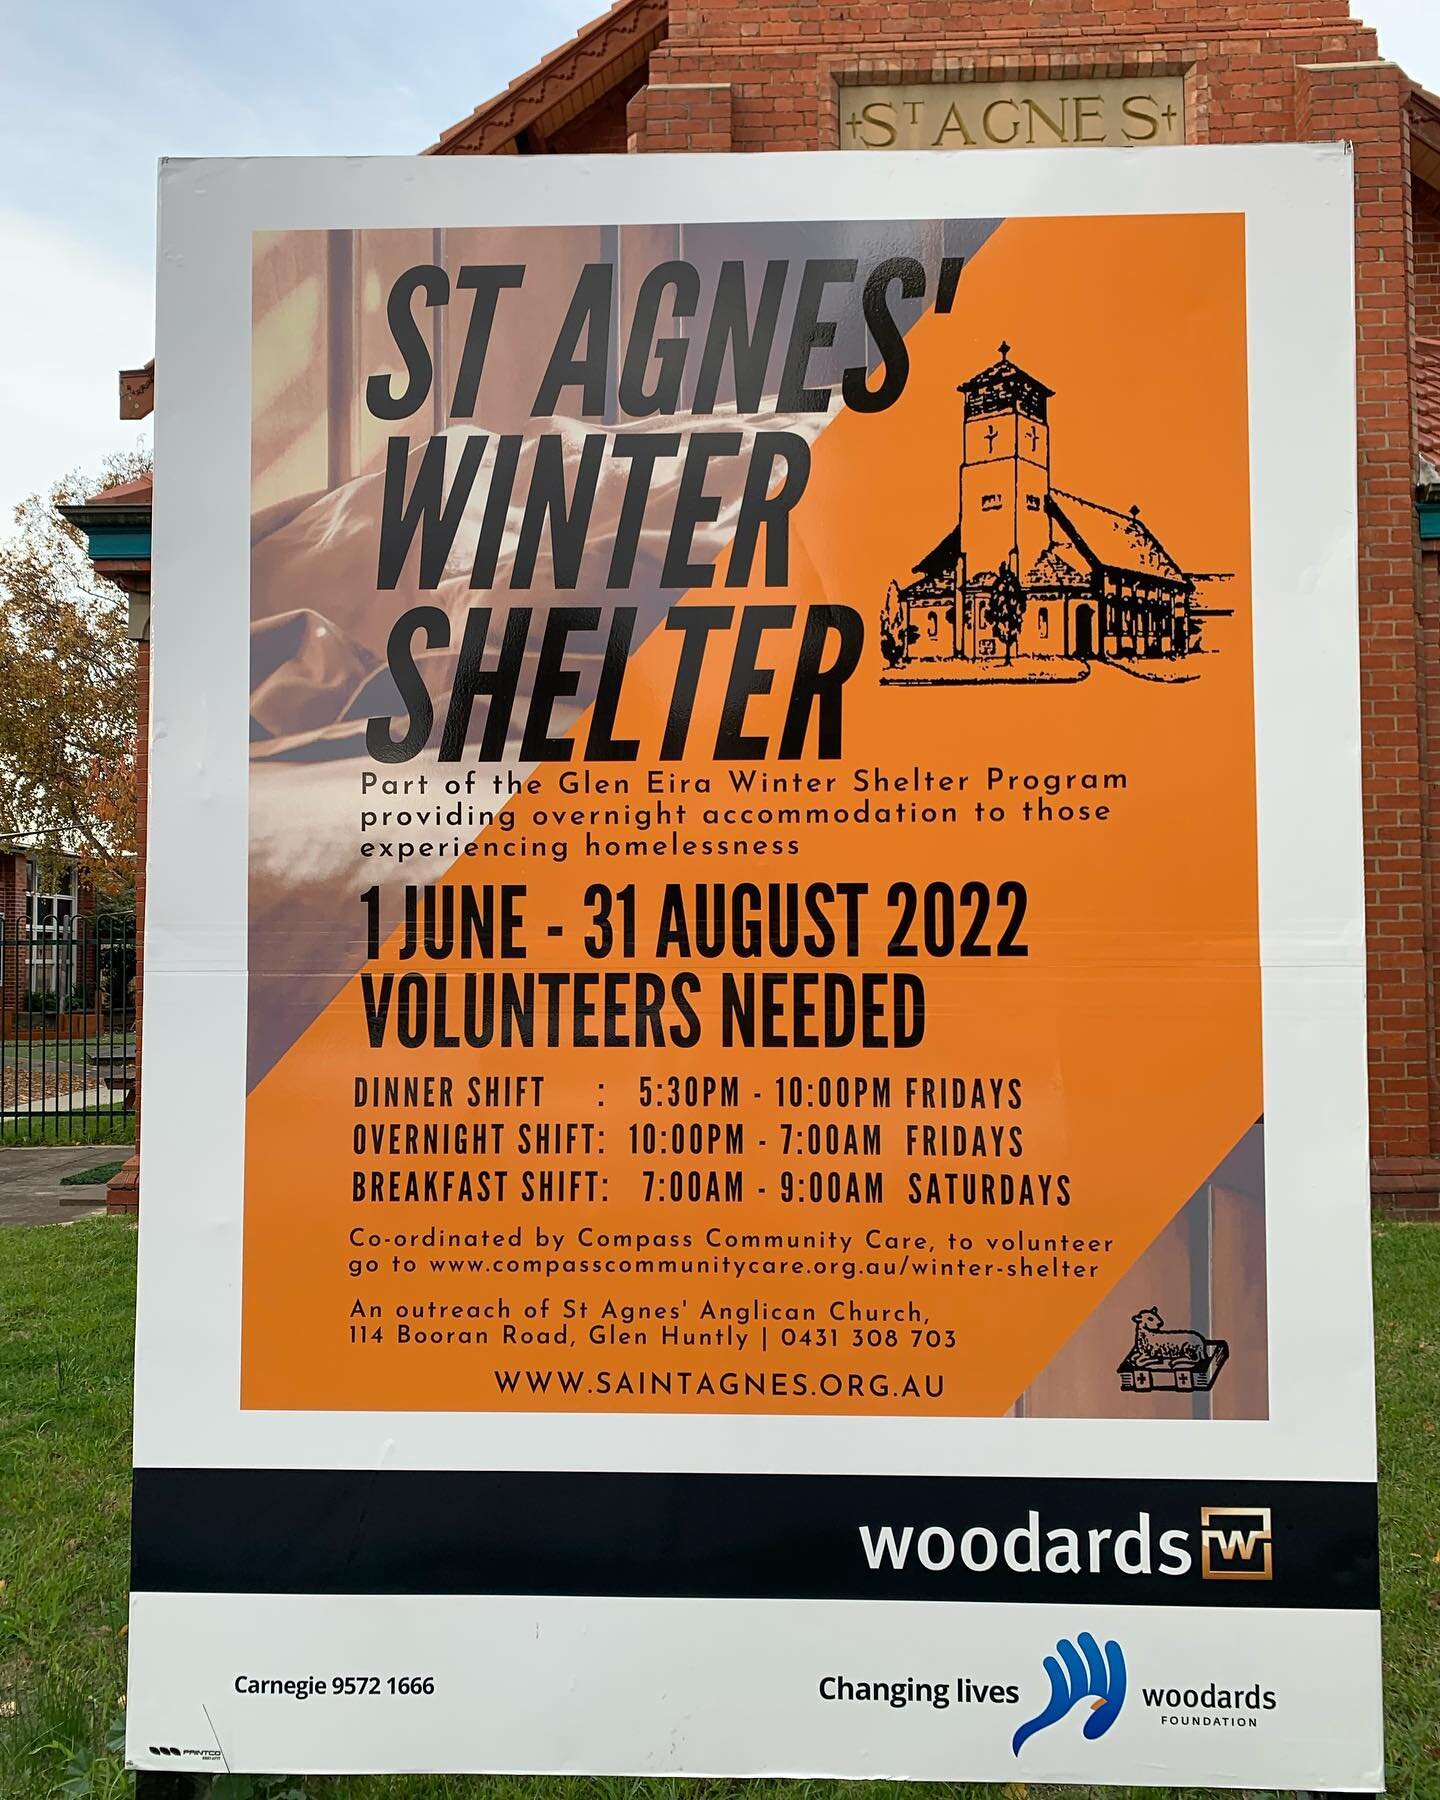 Glen Eira Winter Shelter is sheltering the homeless tonight in the beautiful St Agnes Anglican Church In Glen Huntly thanks to our amazing volunteers who stay overnight with them. We still need more volunteers for every night throughout winter. No qu